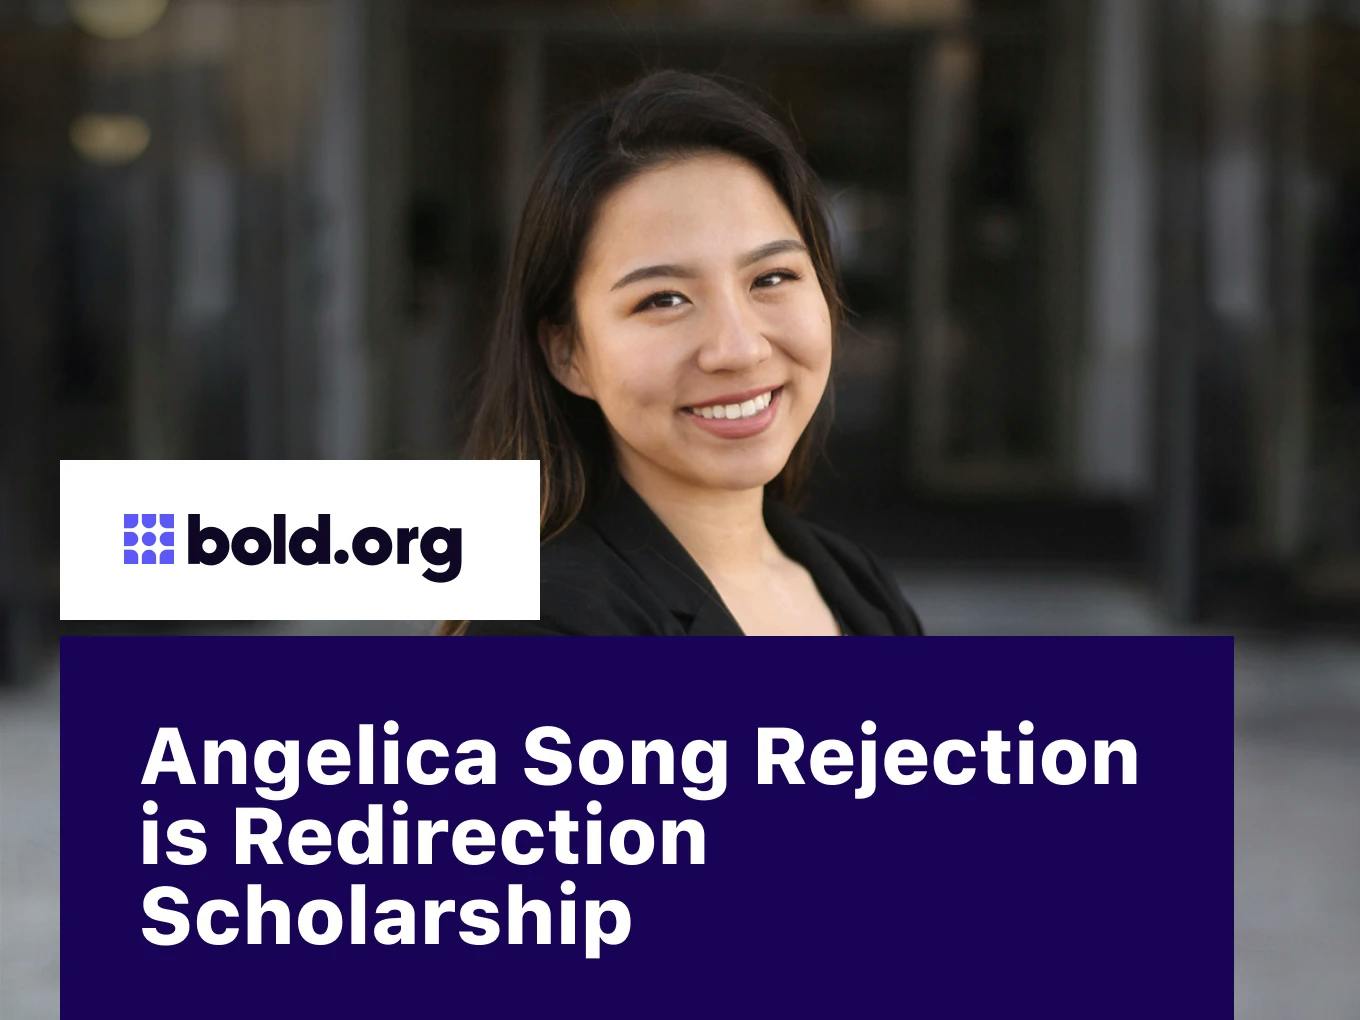 Angelica Song Rejection is Redirection Scholarship